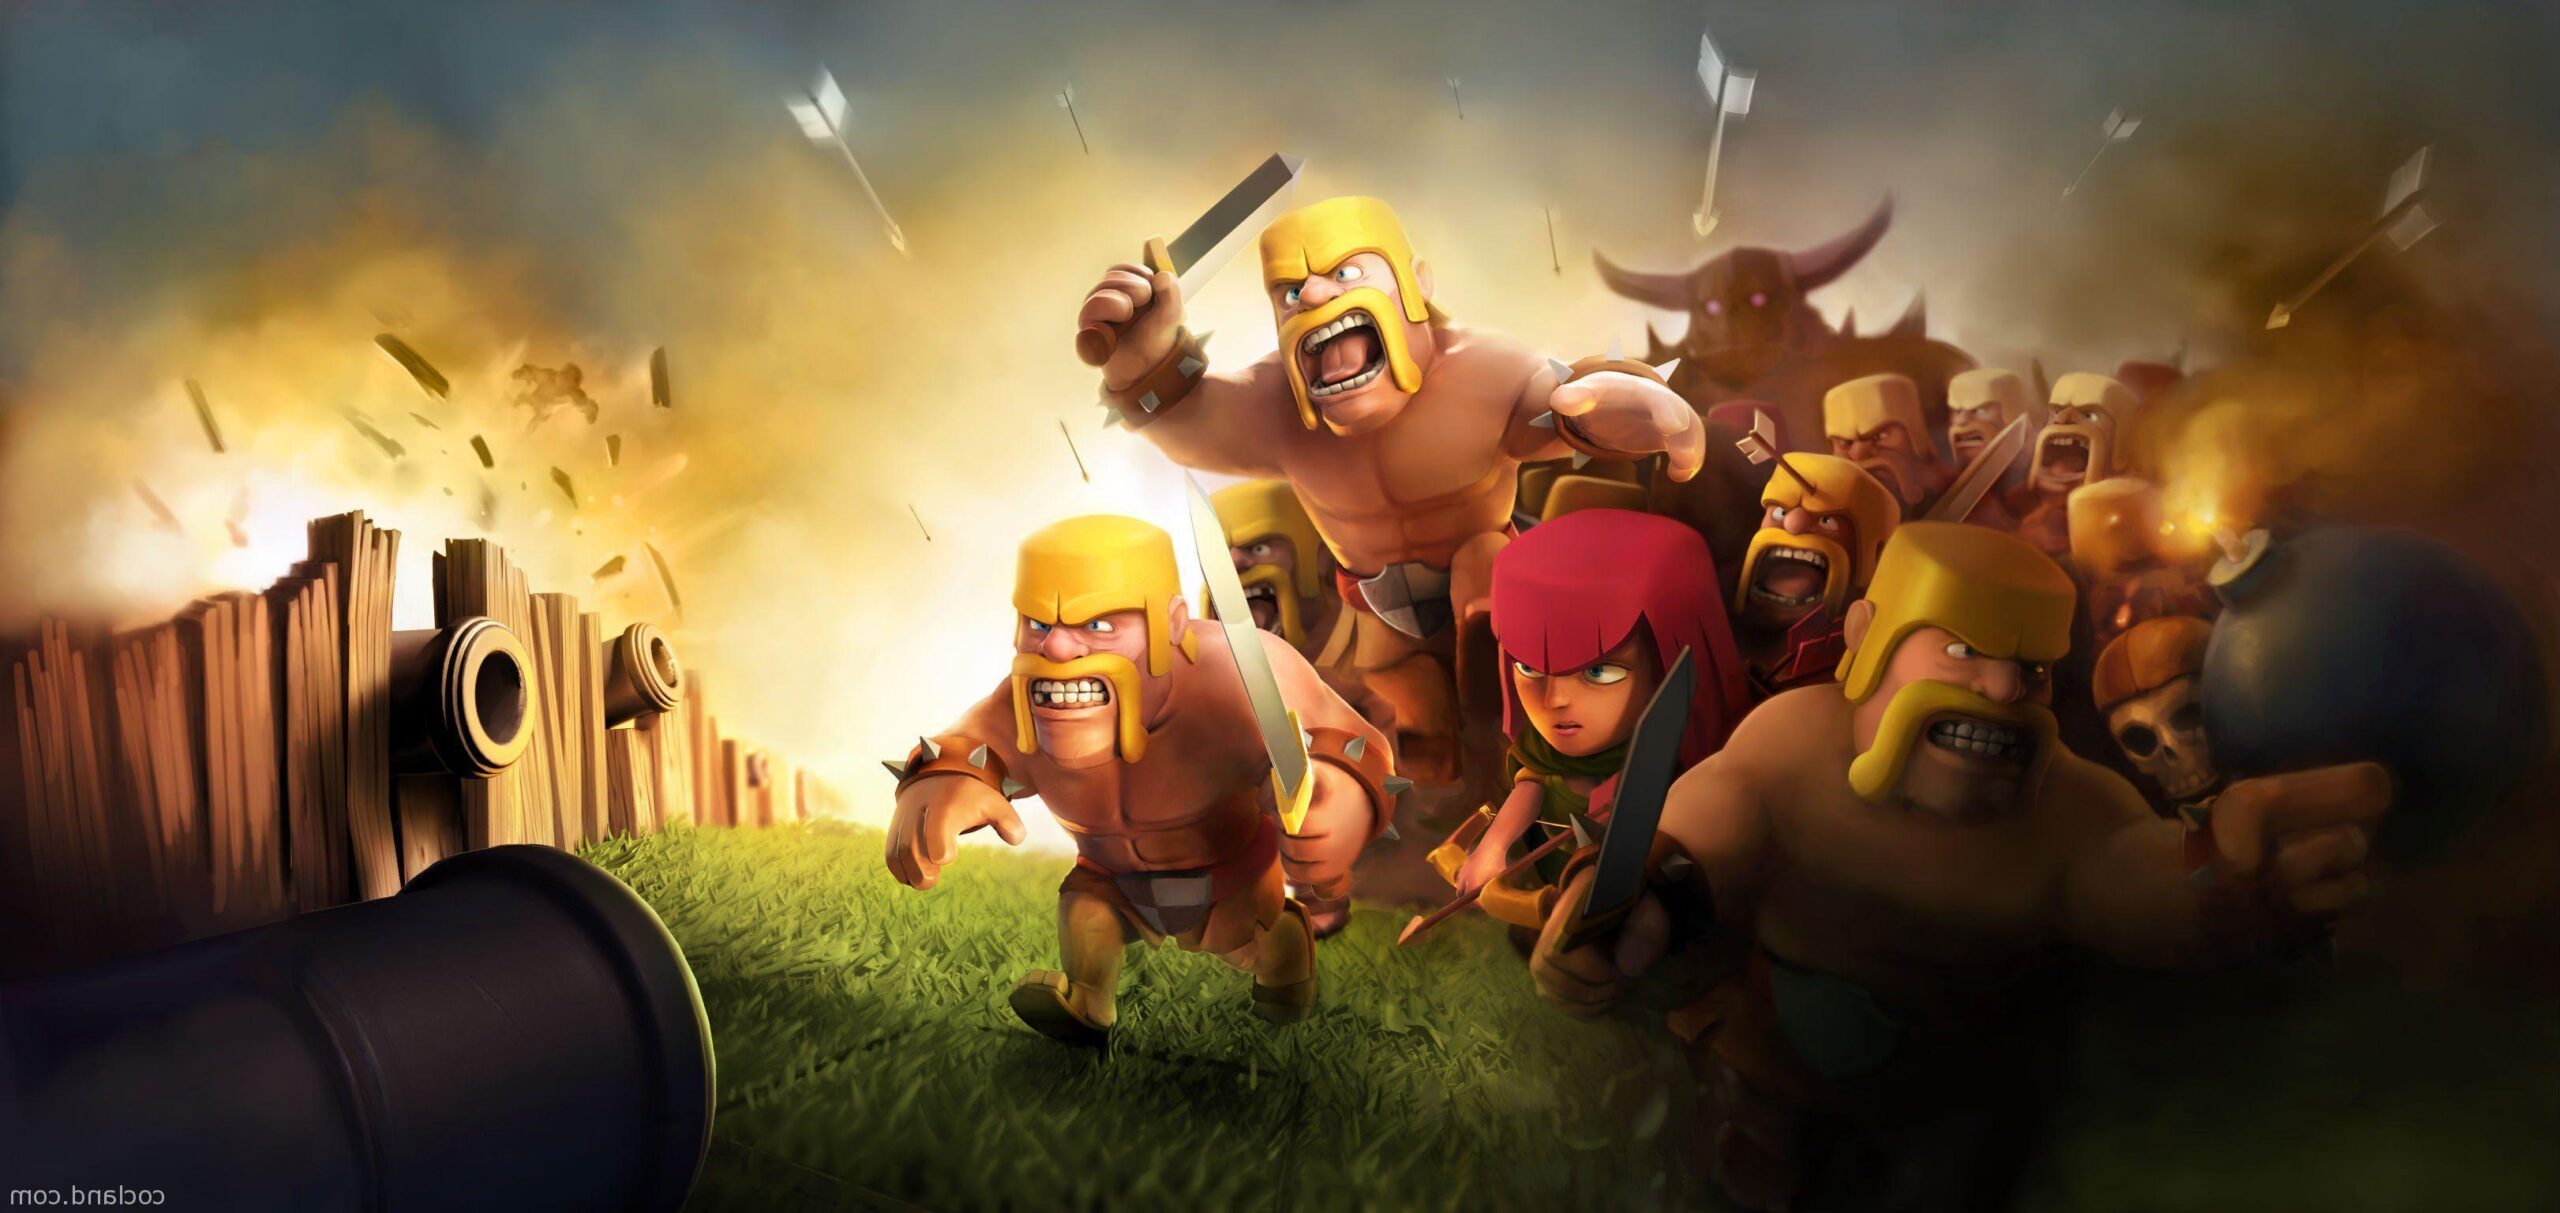 Clash Of Clans New Wallpaper, Clash Of Clans, Game